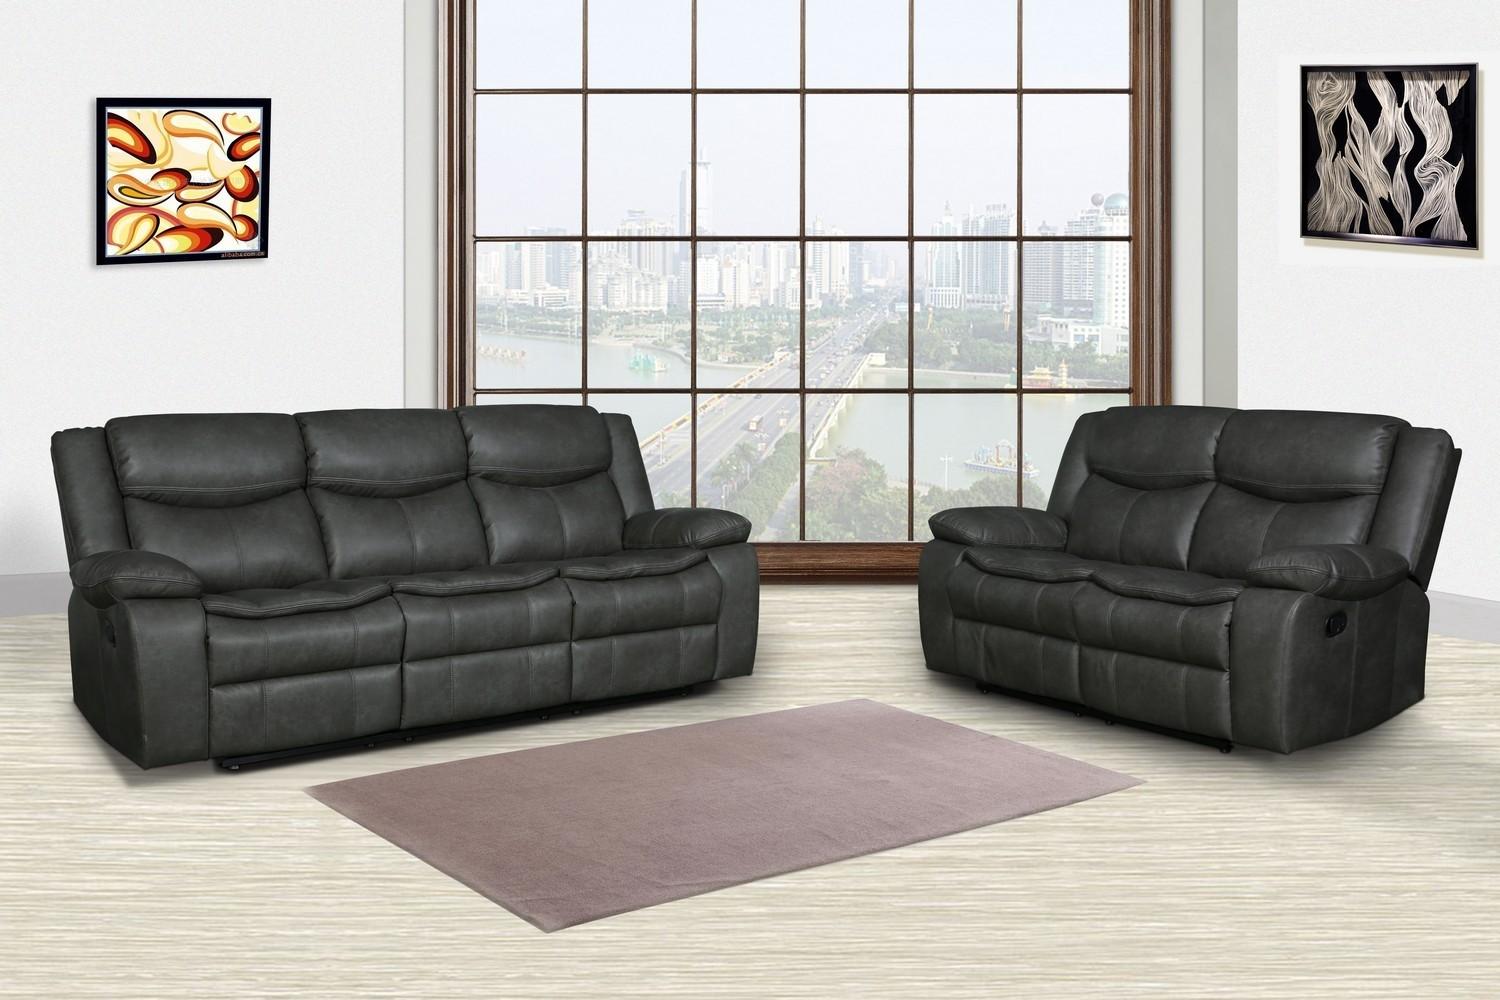 Contemporary Reclining Living Room Set 6967 Reclining Living Room Set 2PCS 6967-GRAY-S-2PCS 6967-GRAY-S-2PCS in Gray leather Air